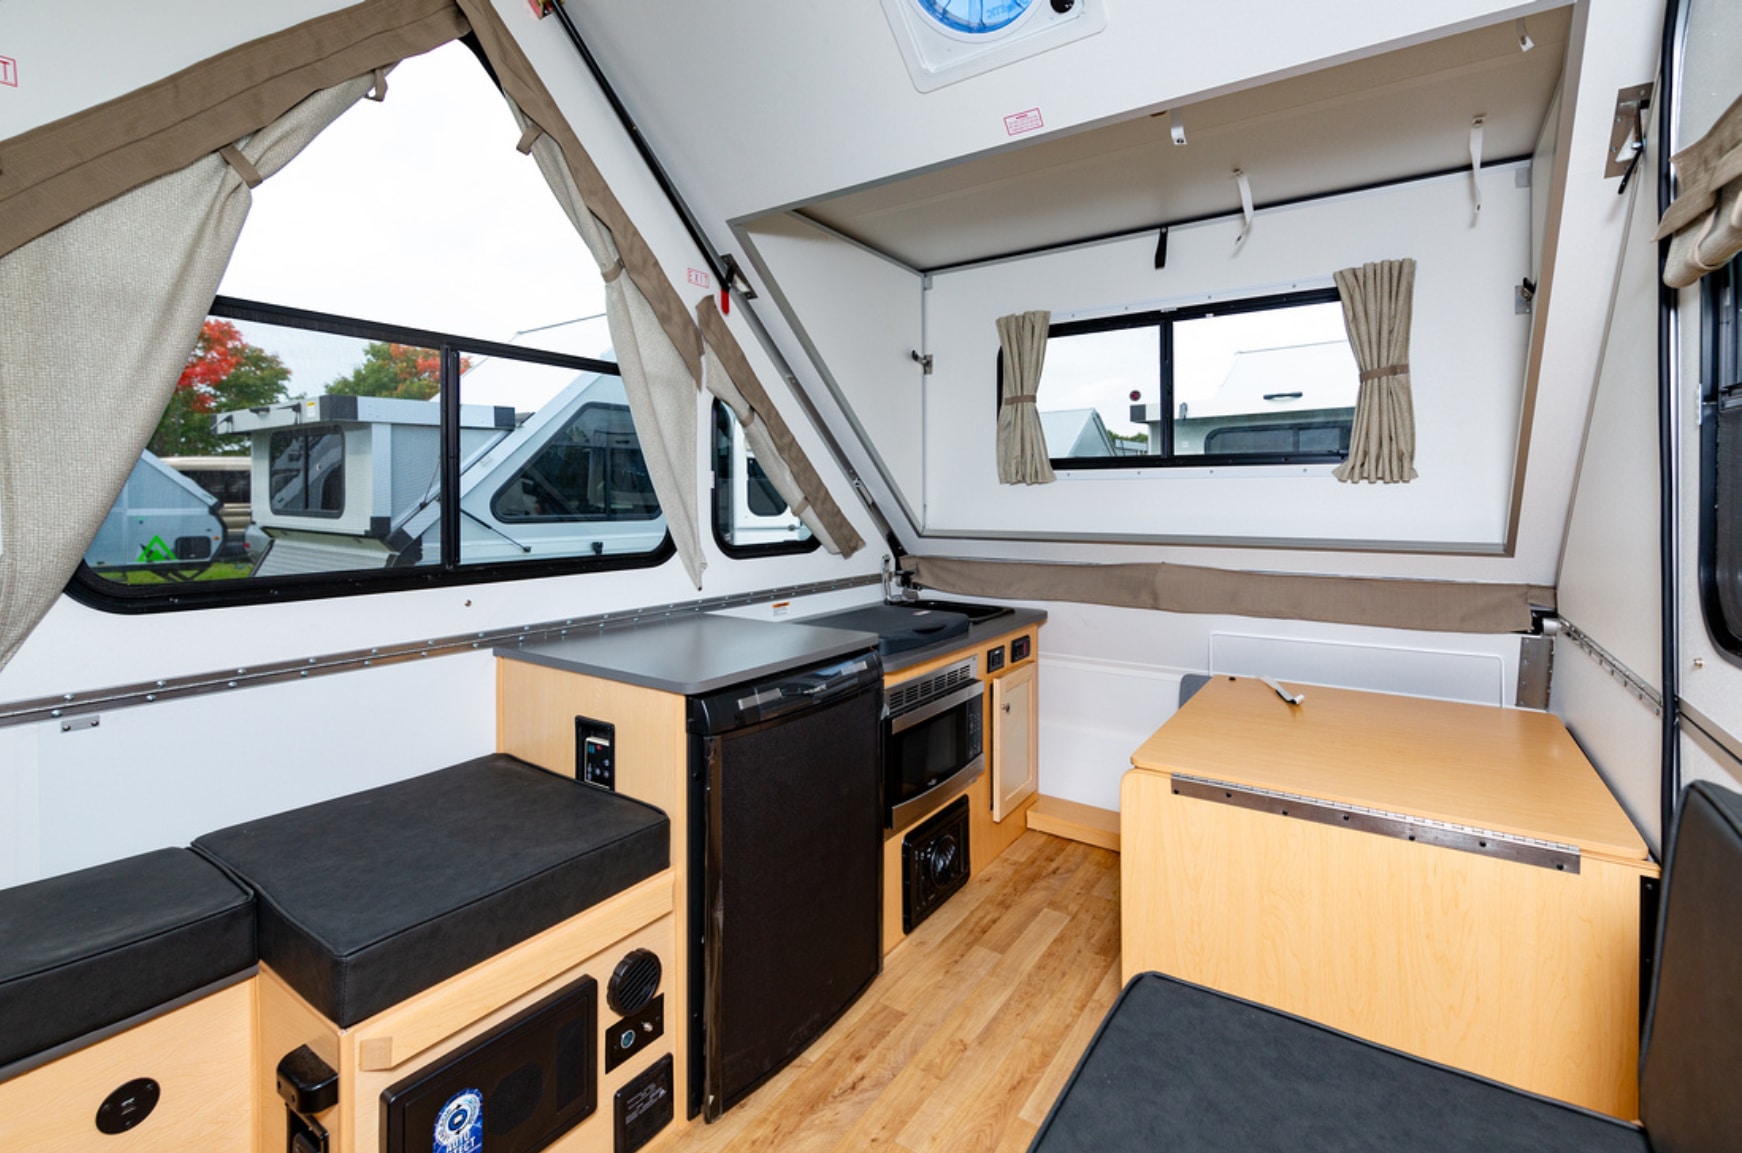 The interior of an rv with a kitchen and dining area.